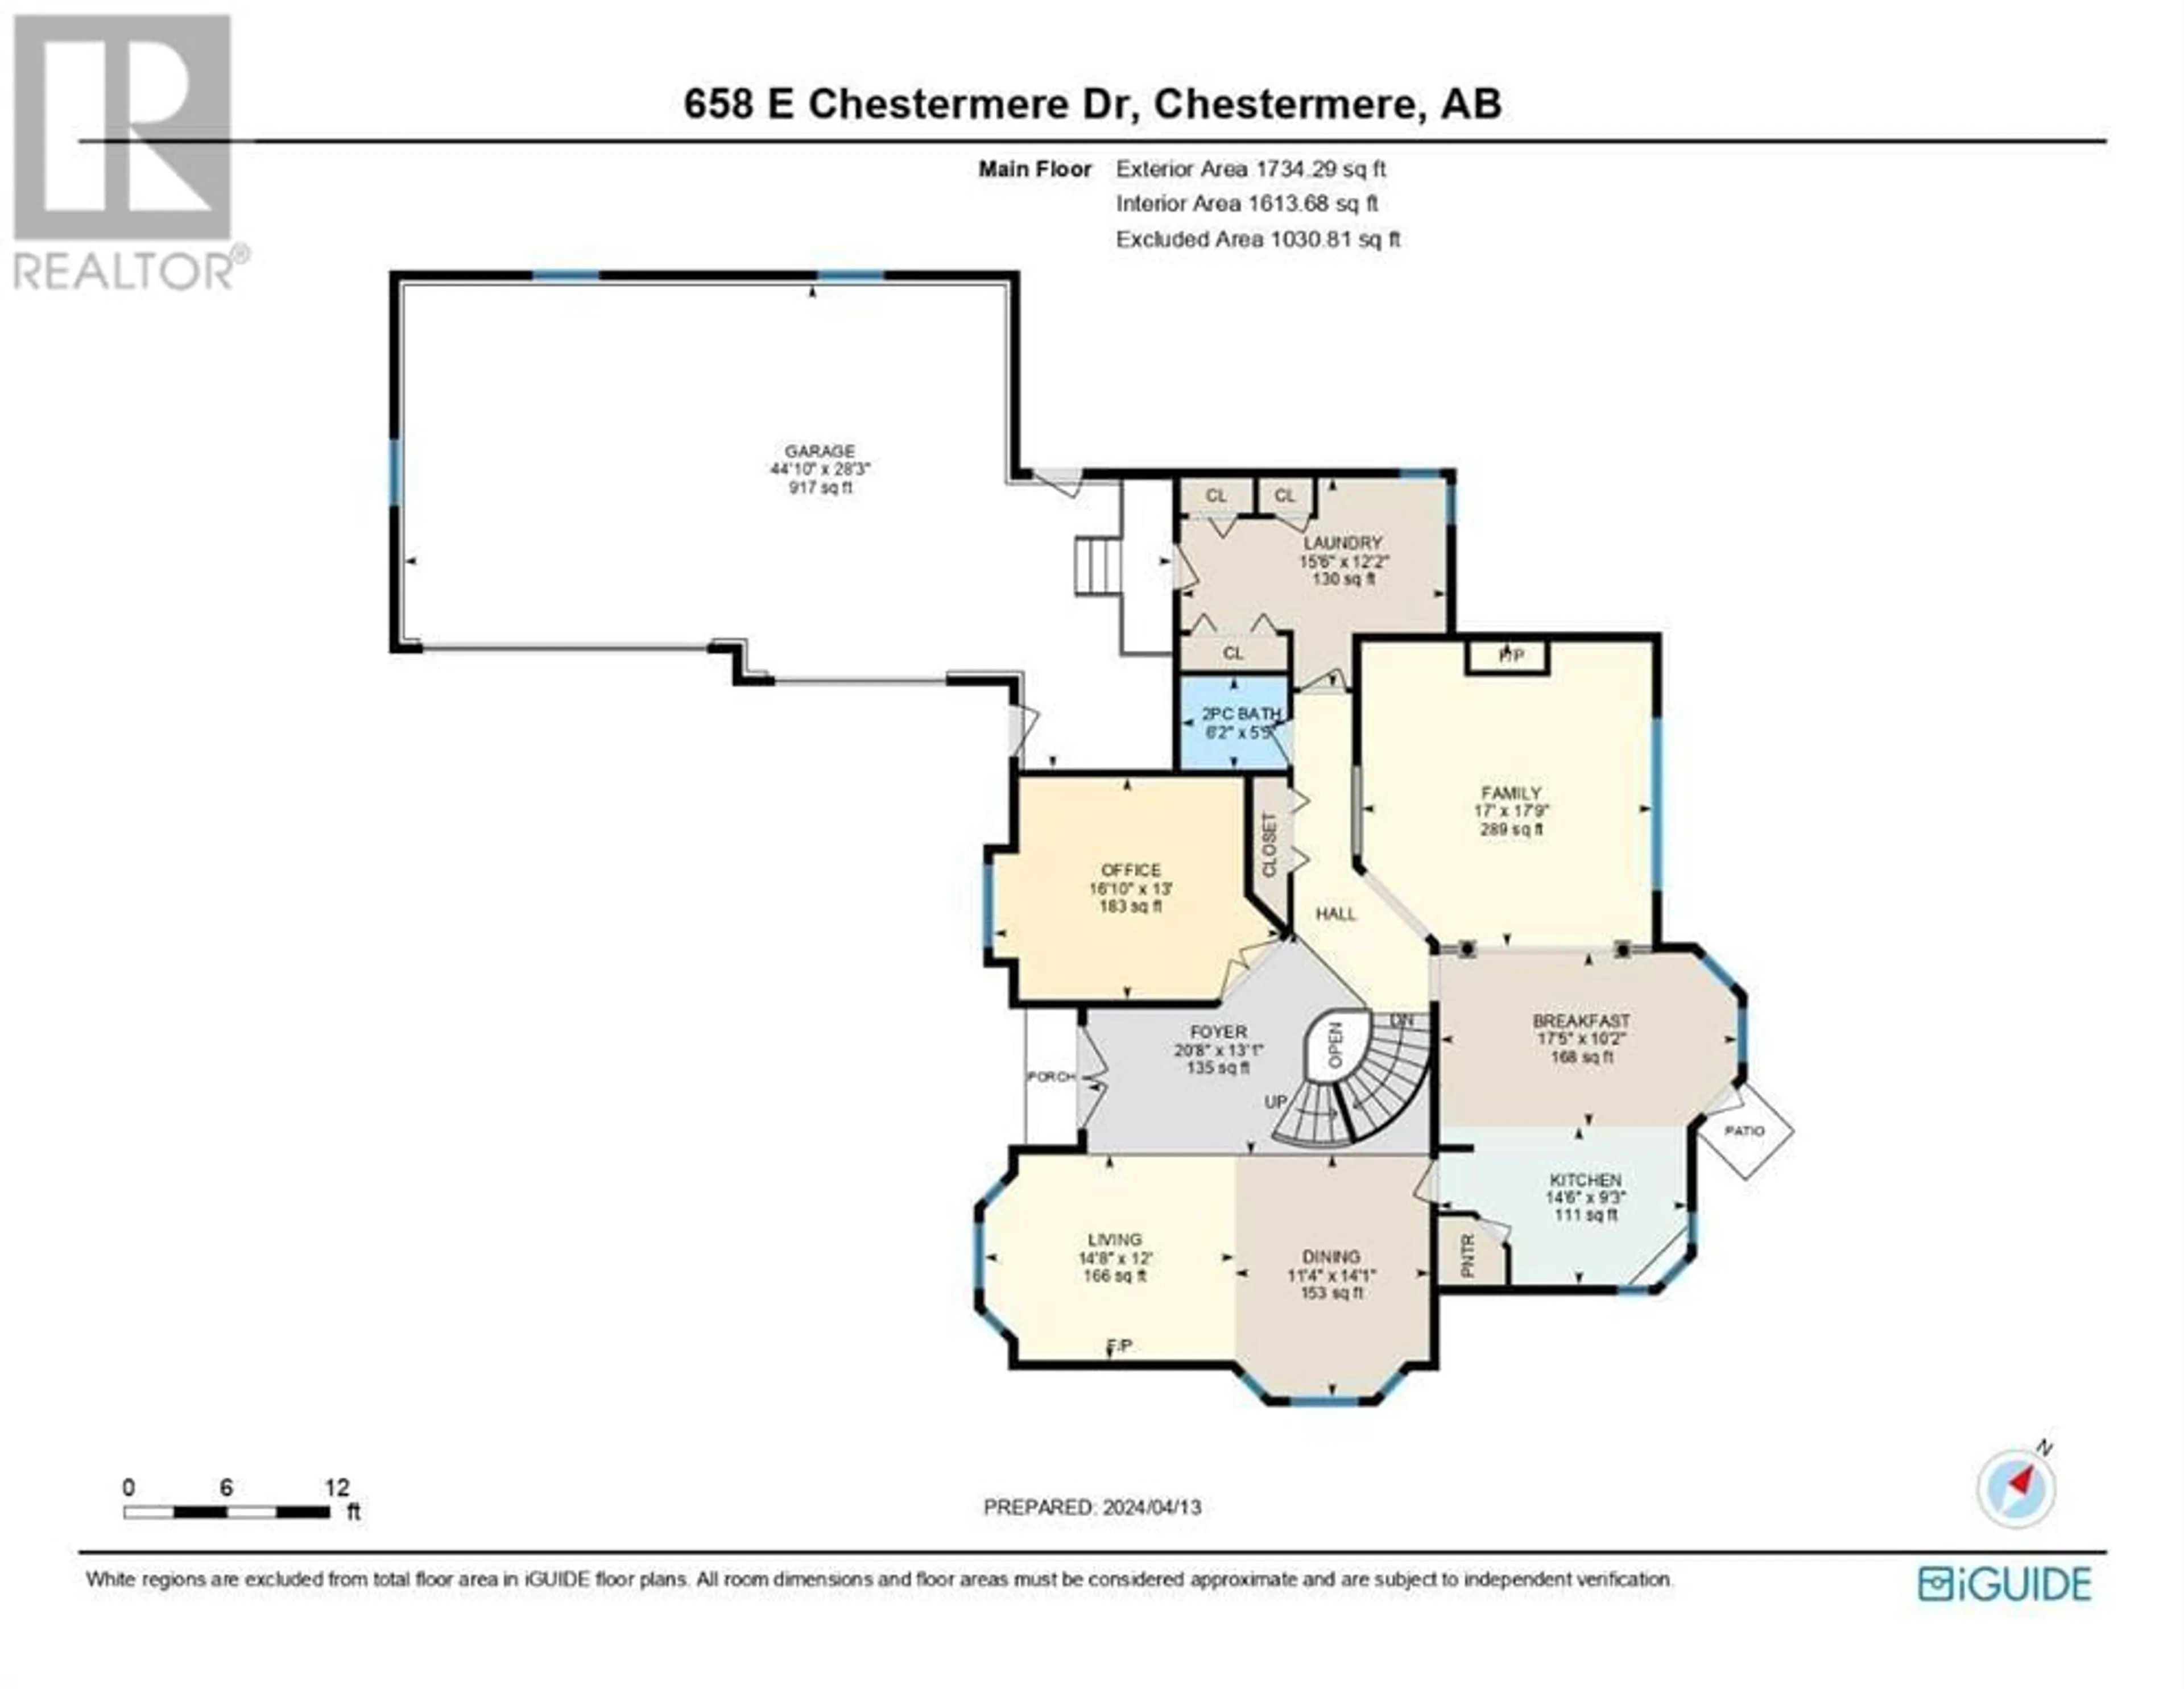 Floor plan for 658 East Chestermere Drive, Chestermere Alberta T1X1A5